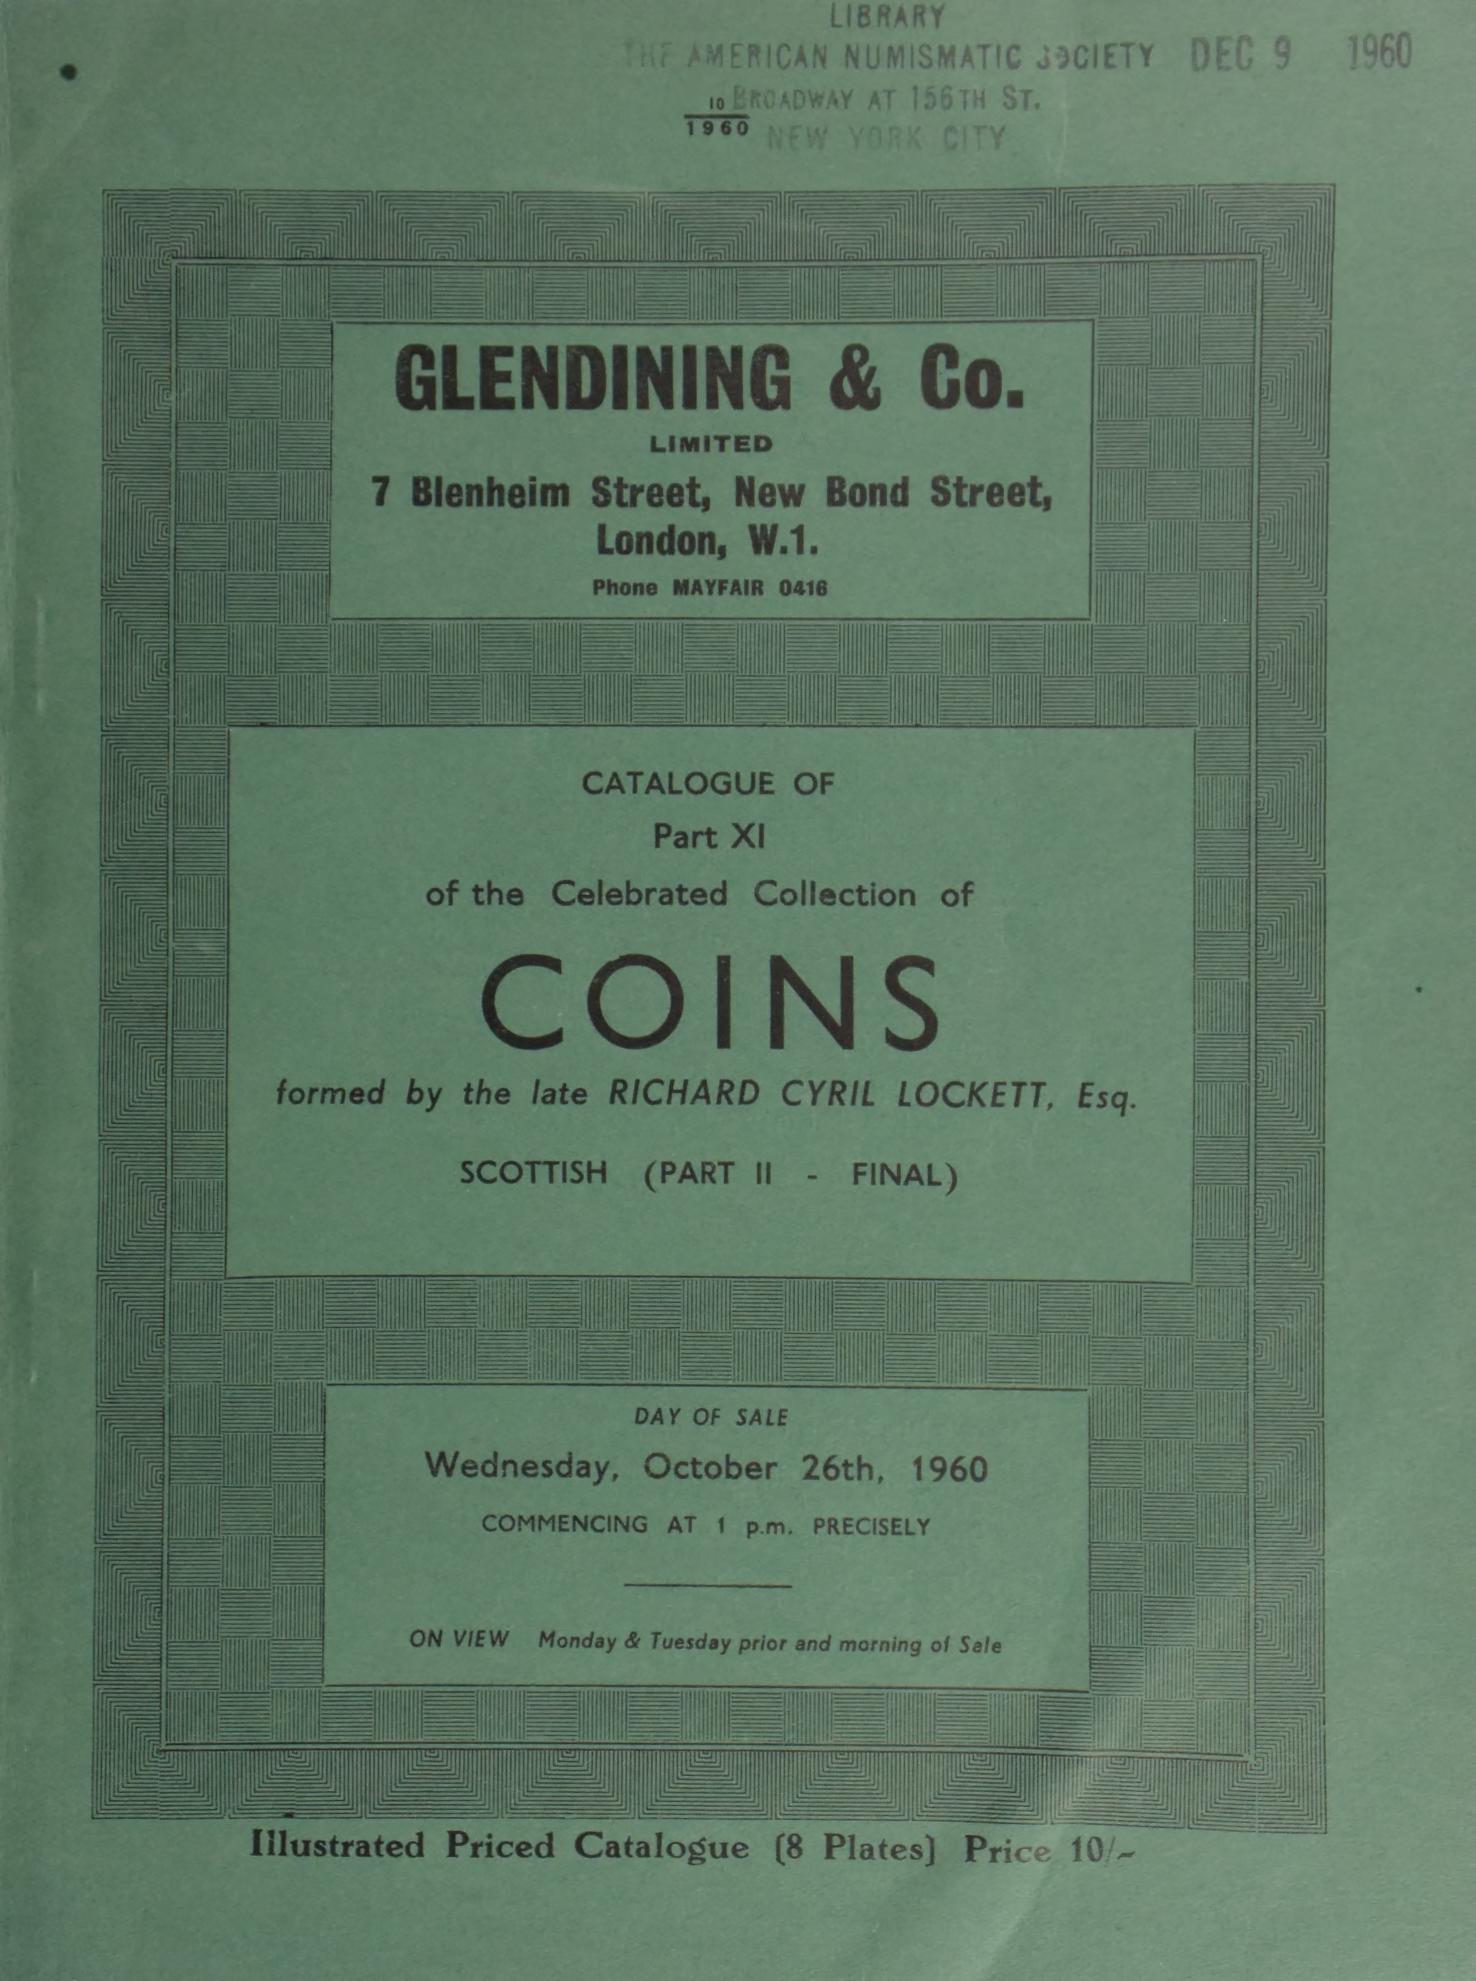 Catalogue of Part XI of the celebrated collection of coins, formed 